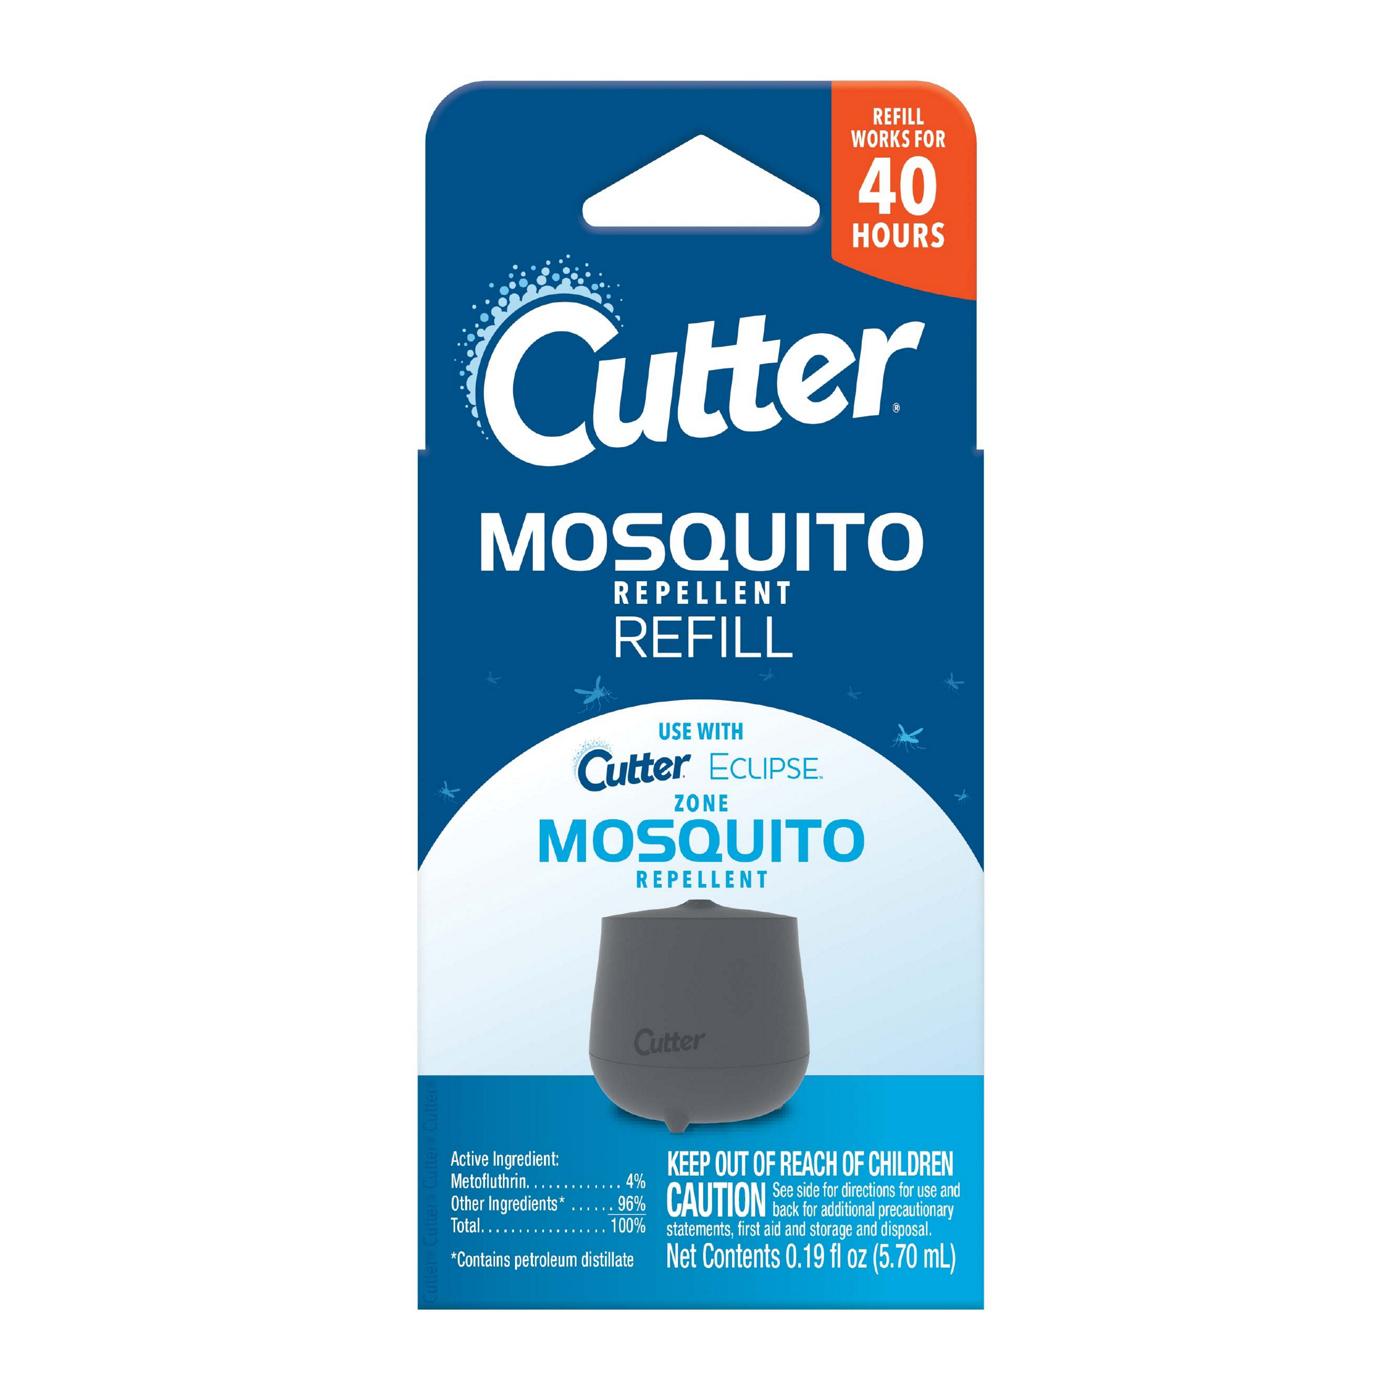 Cutter Eclipse Zone Mosquito Repellent Refill; image 1 of 2